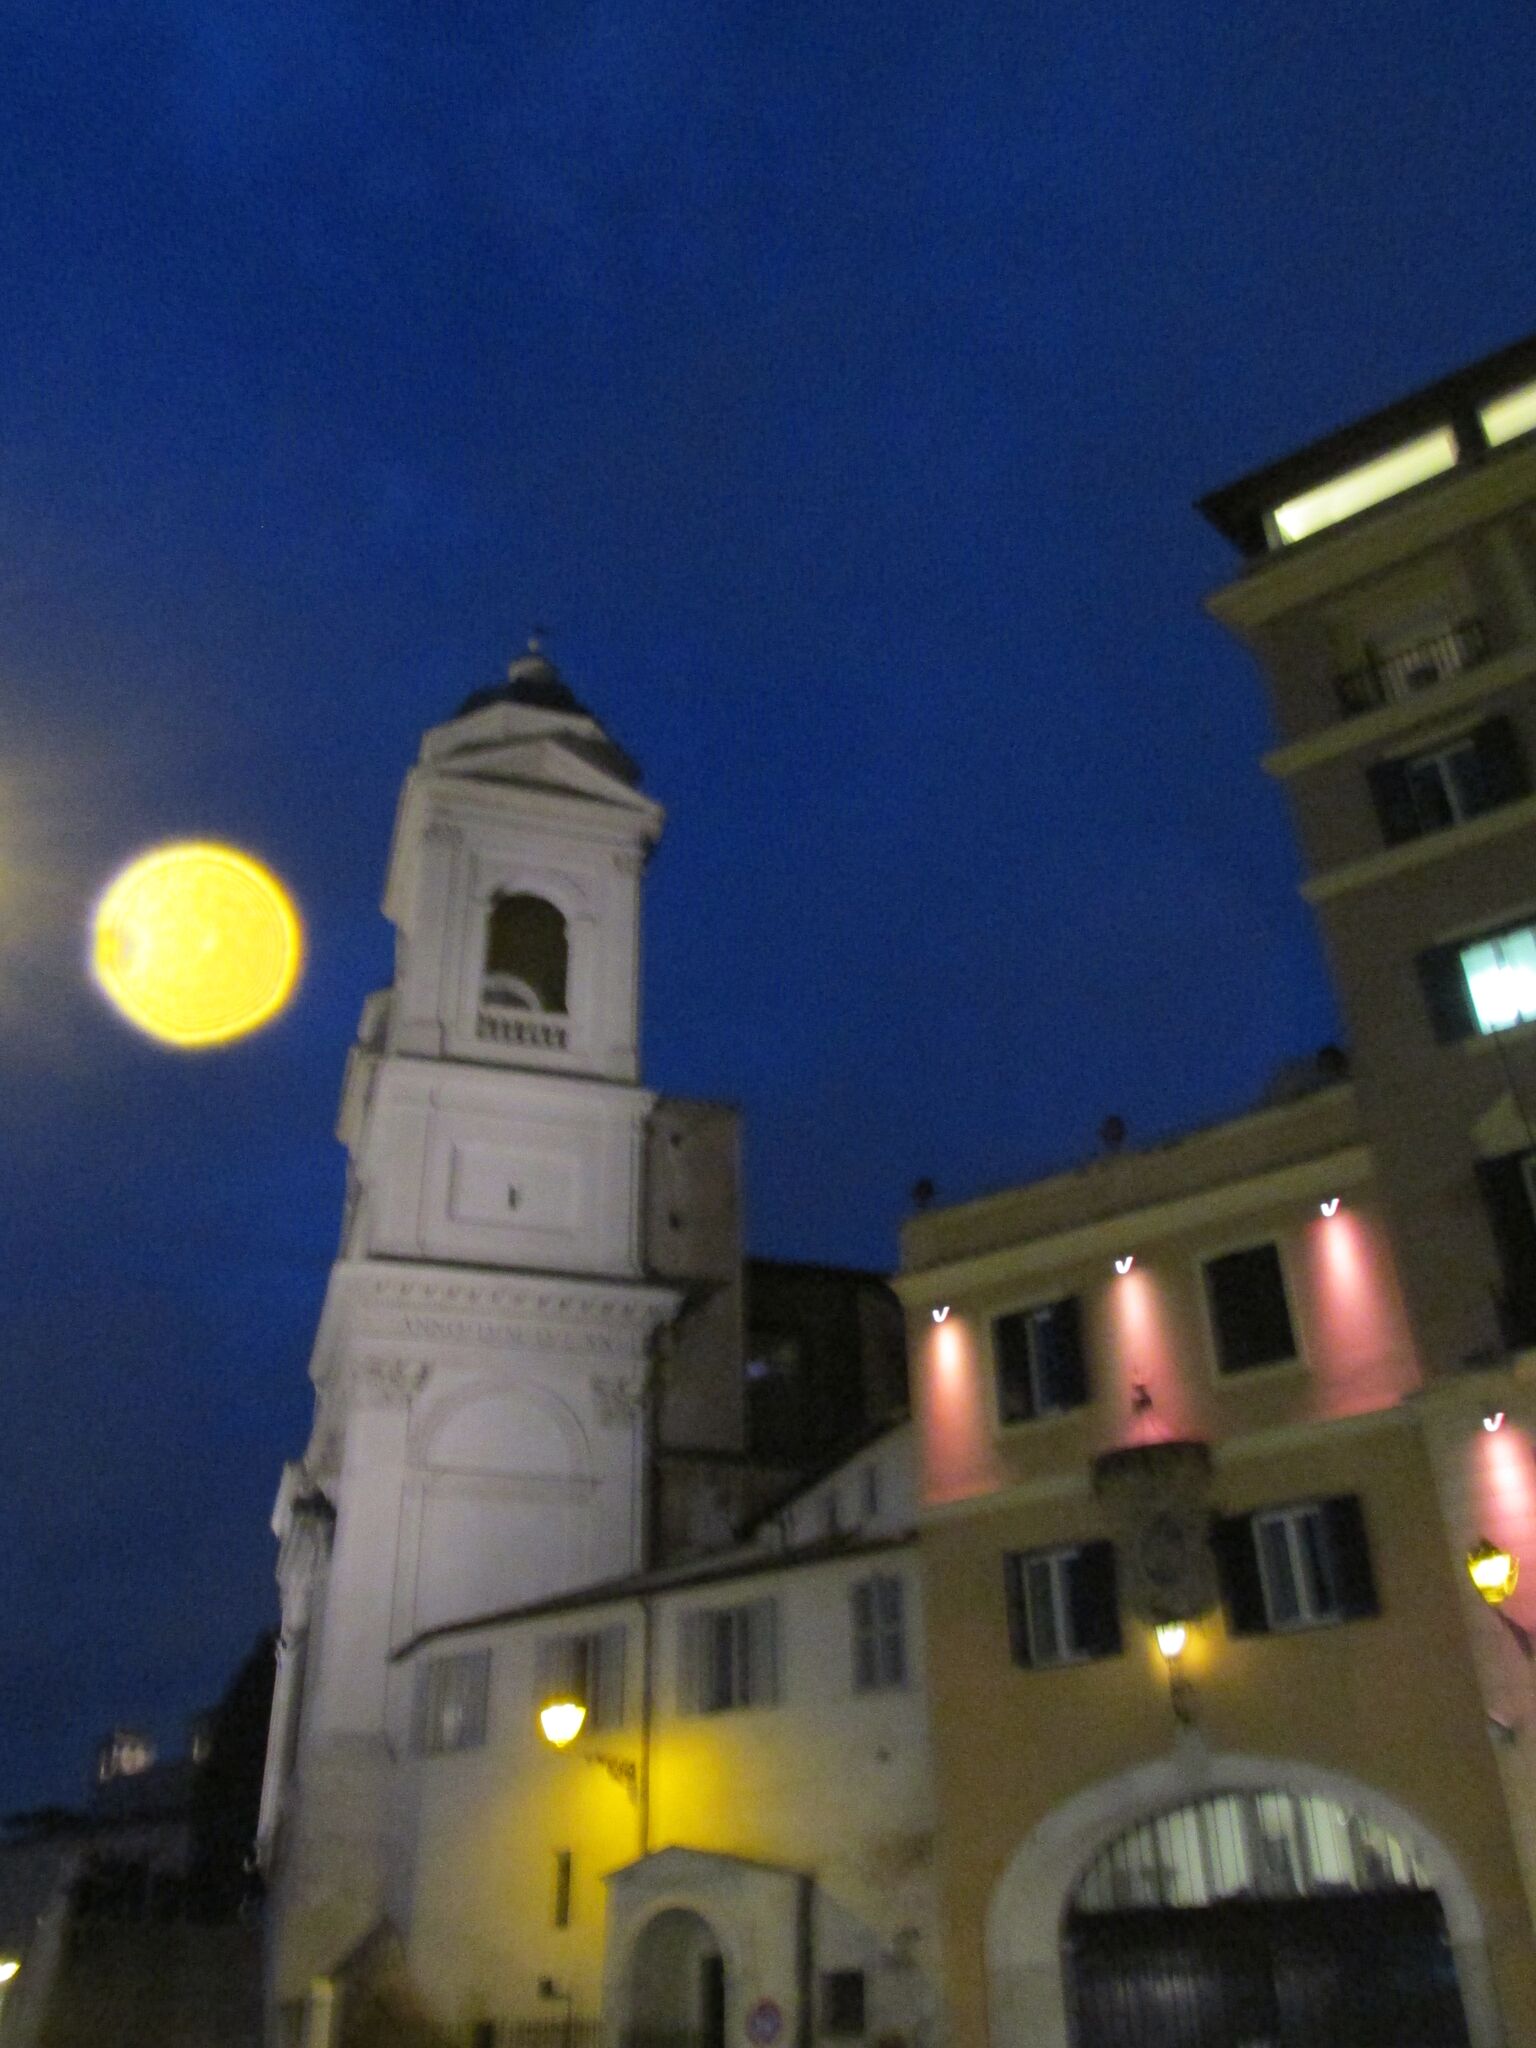 A moonlit view just steps from the entrance of the Hotel Scalinata di Spagna Photo credit: M. Ciavardini